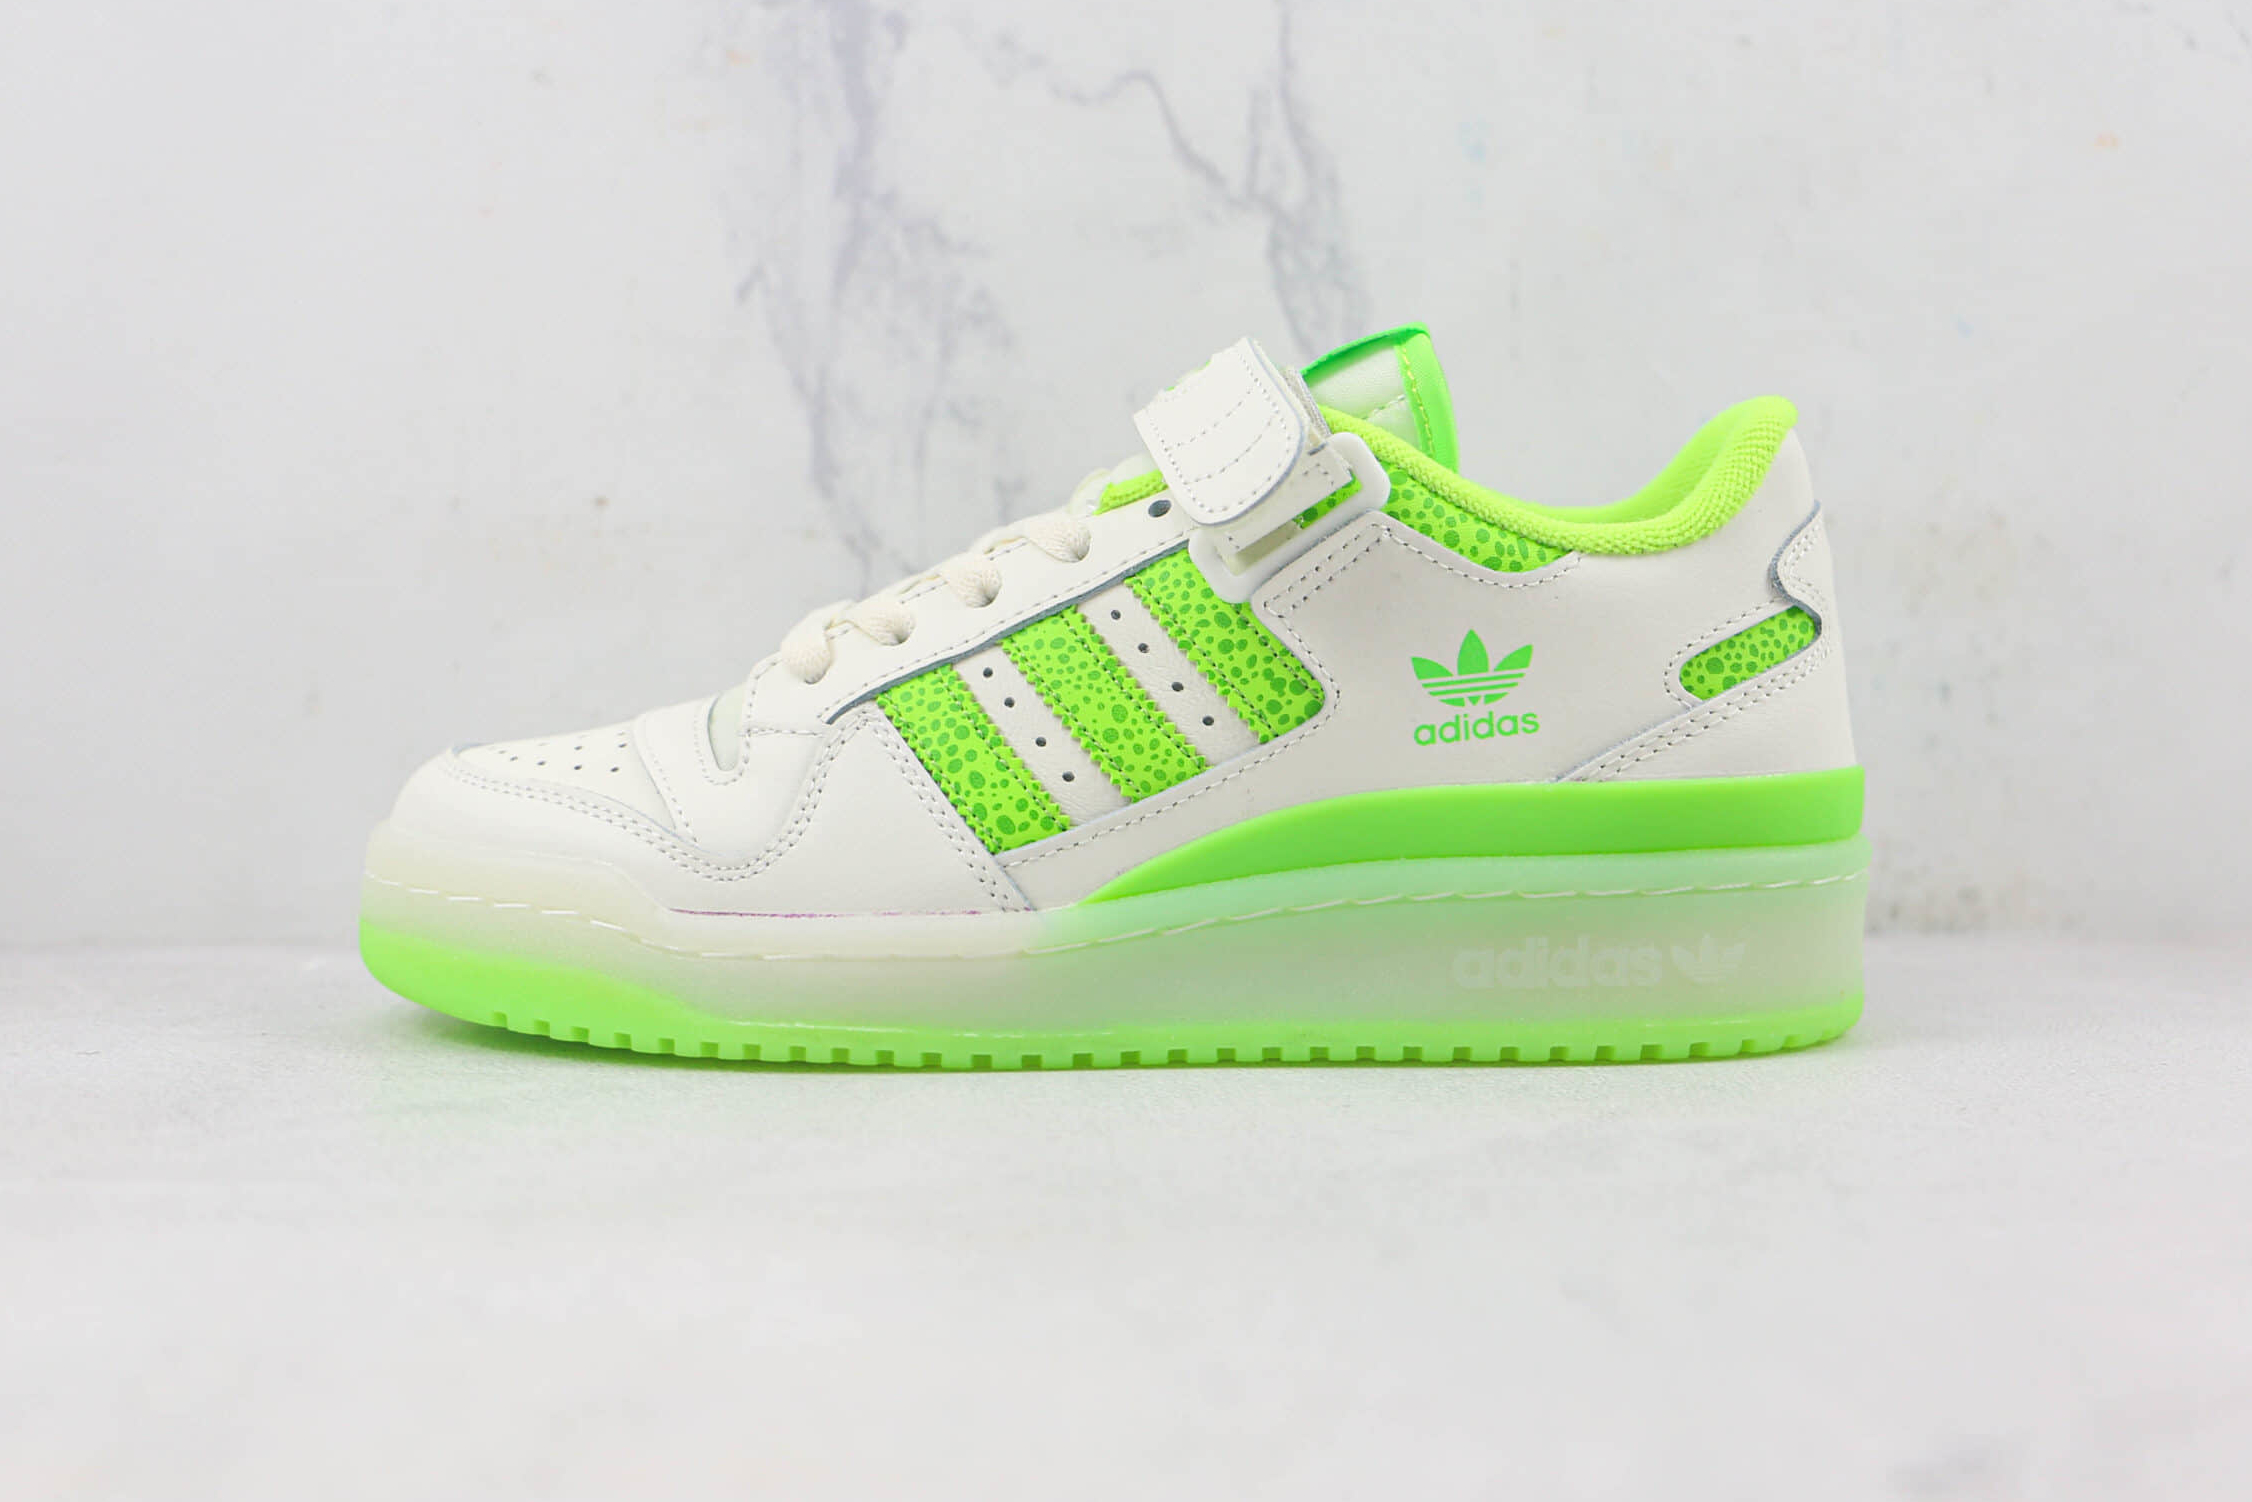 Adidas Forum Low Lime Green White - Stylish and Vibrant Footwear